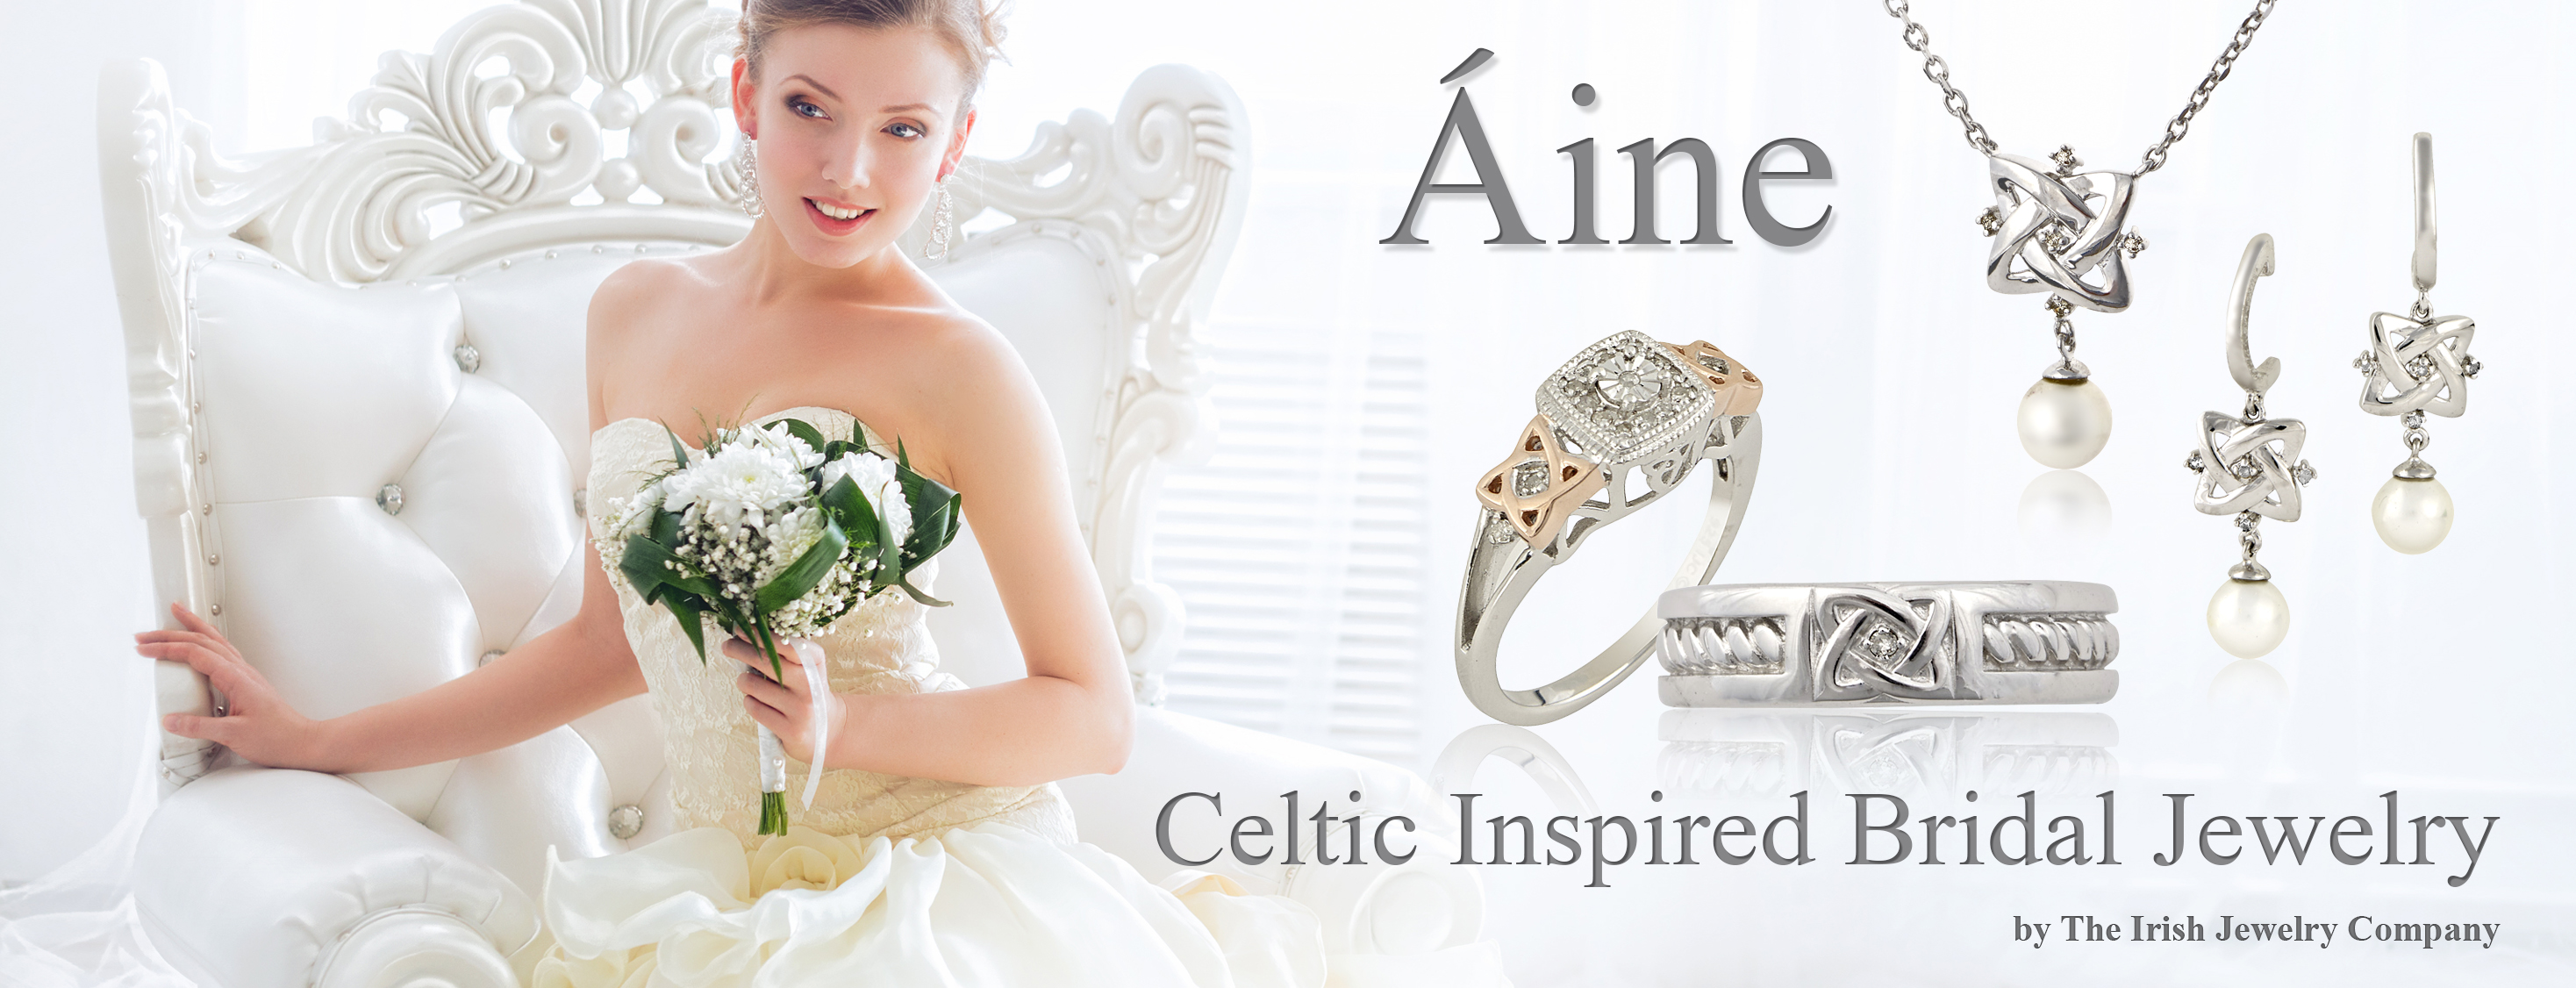 Celtic Bridal Jewelry Collection